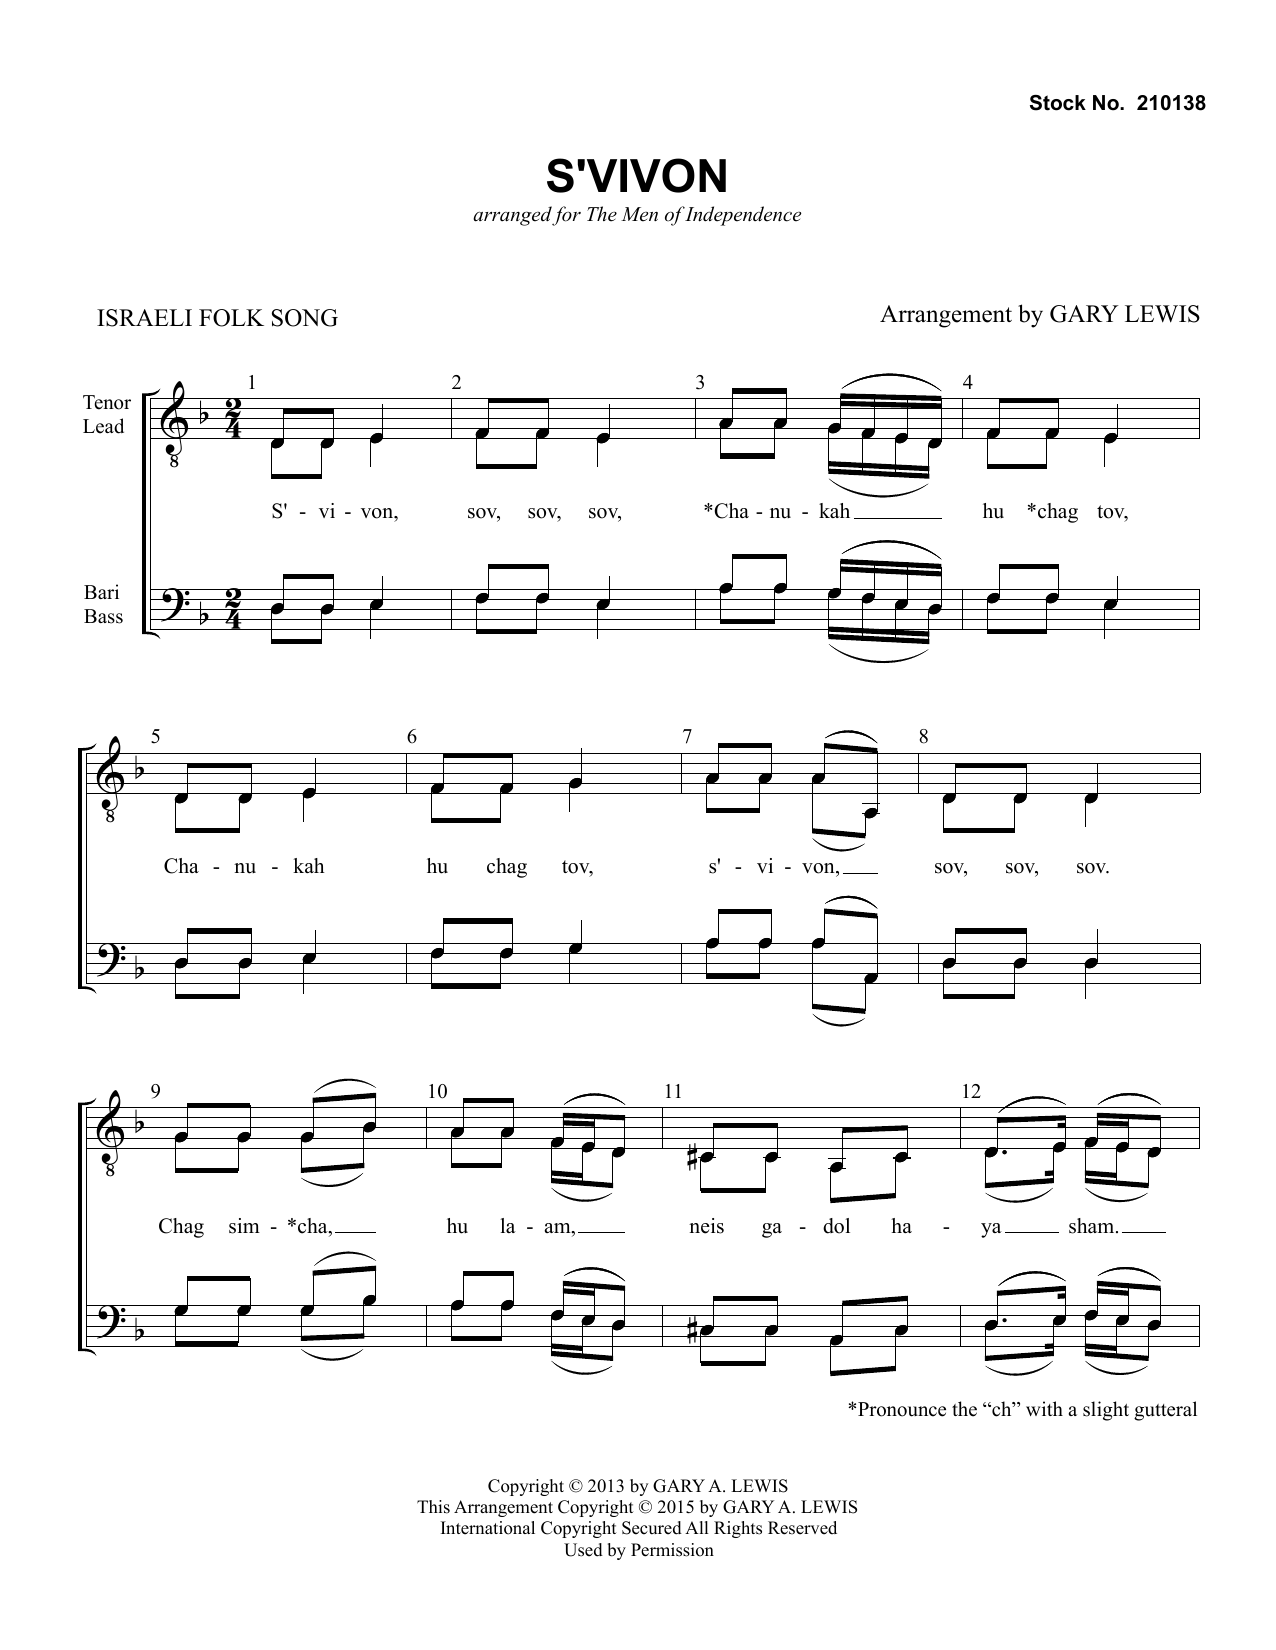 Download Traditional Folksong S'Vivon (arr. Gary Lewis) Sheet Music